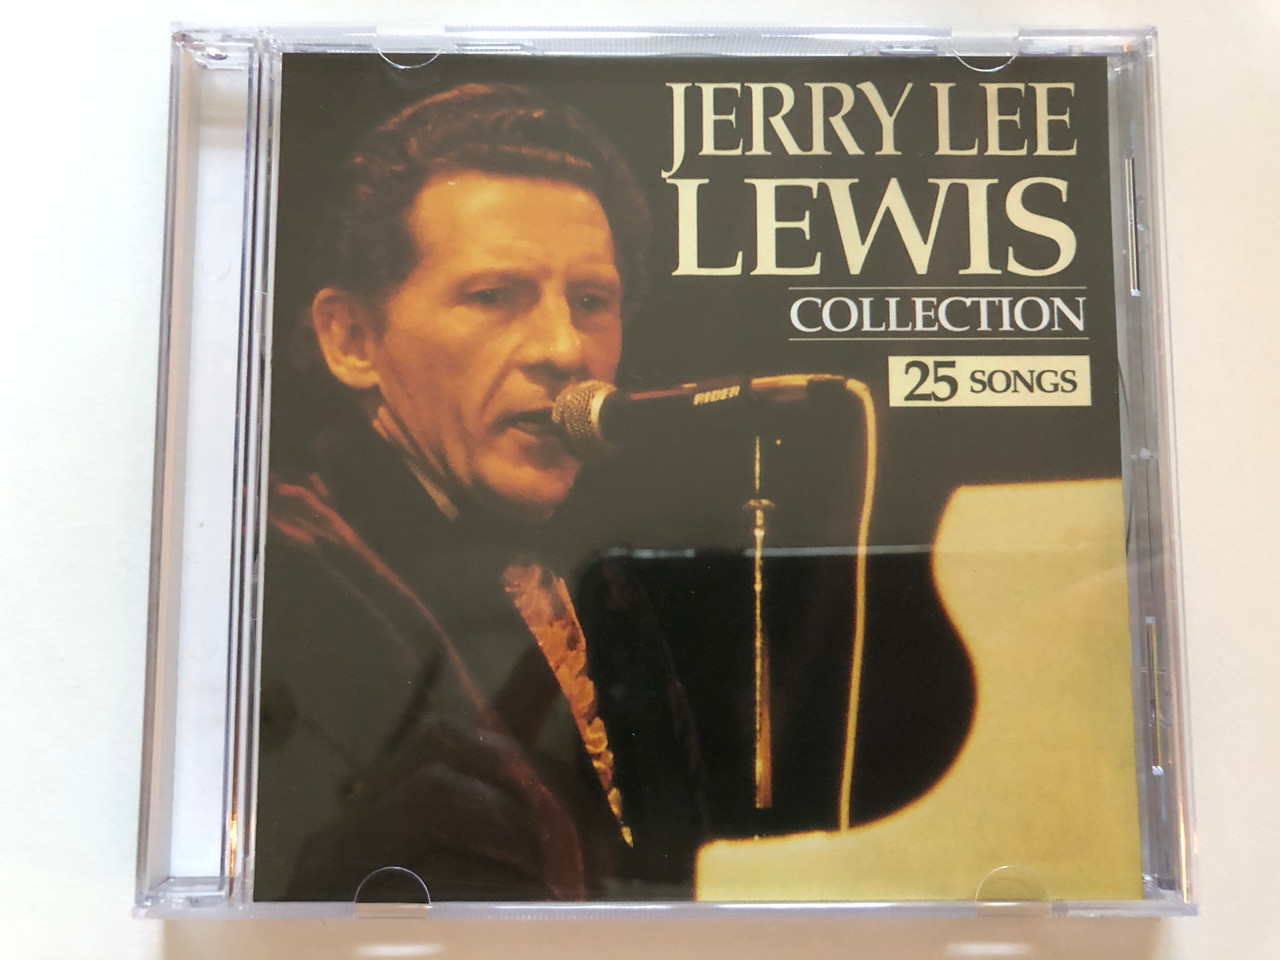 https://cdn10.bigcommerce.com/s-62bdpkt7pb/products/30687/images/181231/Jerry_Lee_Lewis_Collection_25_Songs_The_Collection_Audio_CD_1993_COL_023_1__07829.1623663040.1280.1280.JPG?c=2&_ga=2.142269876.787544708.1623769862-1646000393.1623769862